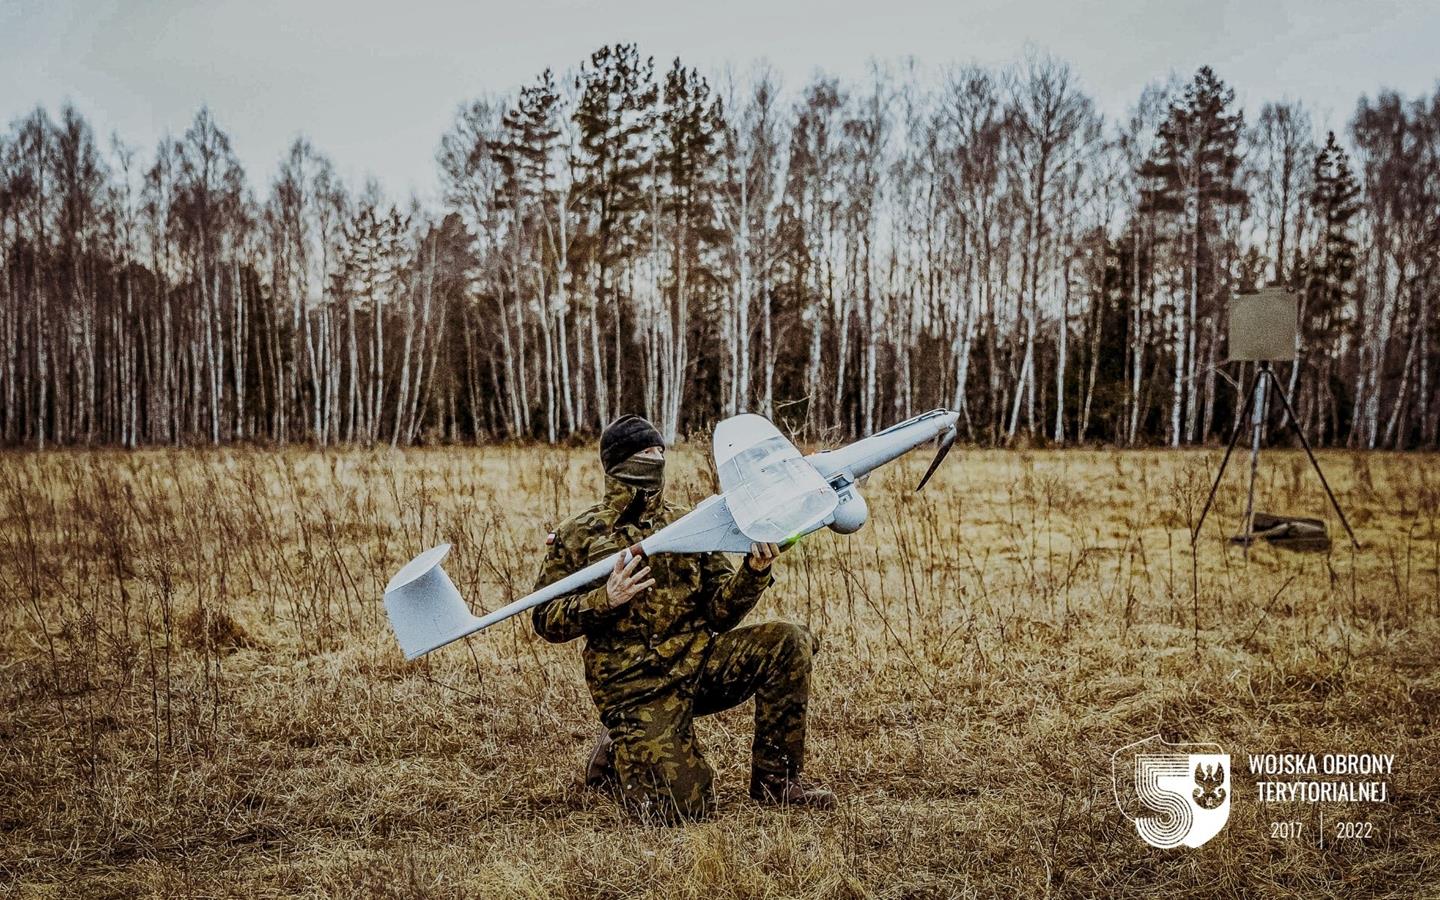 Polish FlyEye drones have already flown over 1000 hours on the border with Belarus